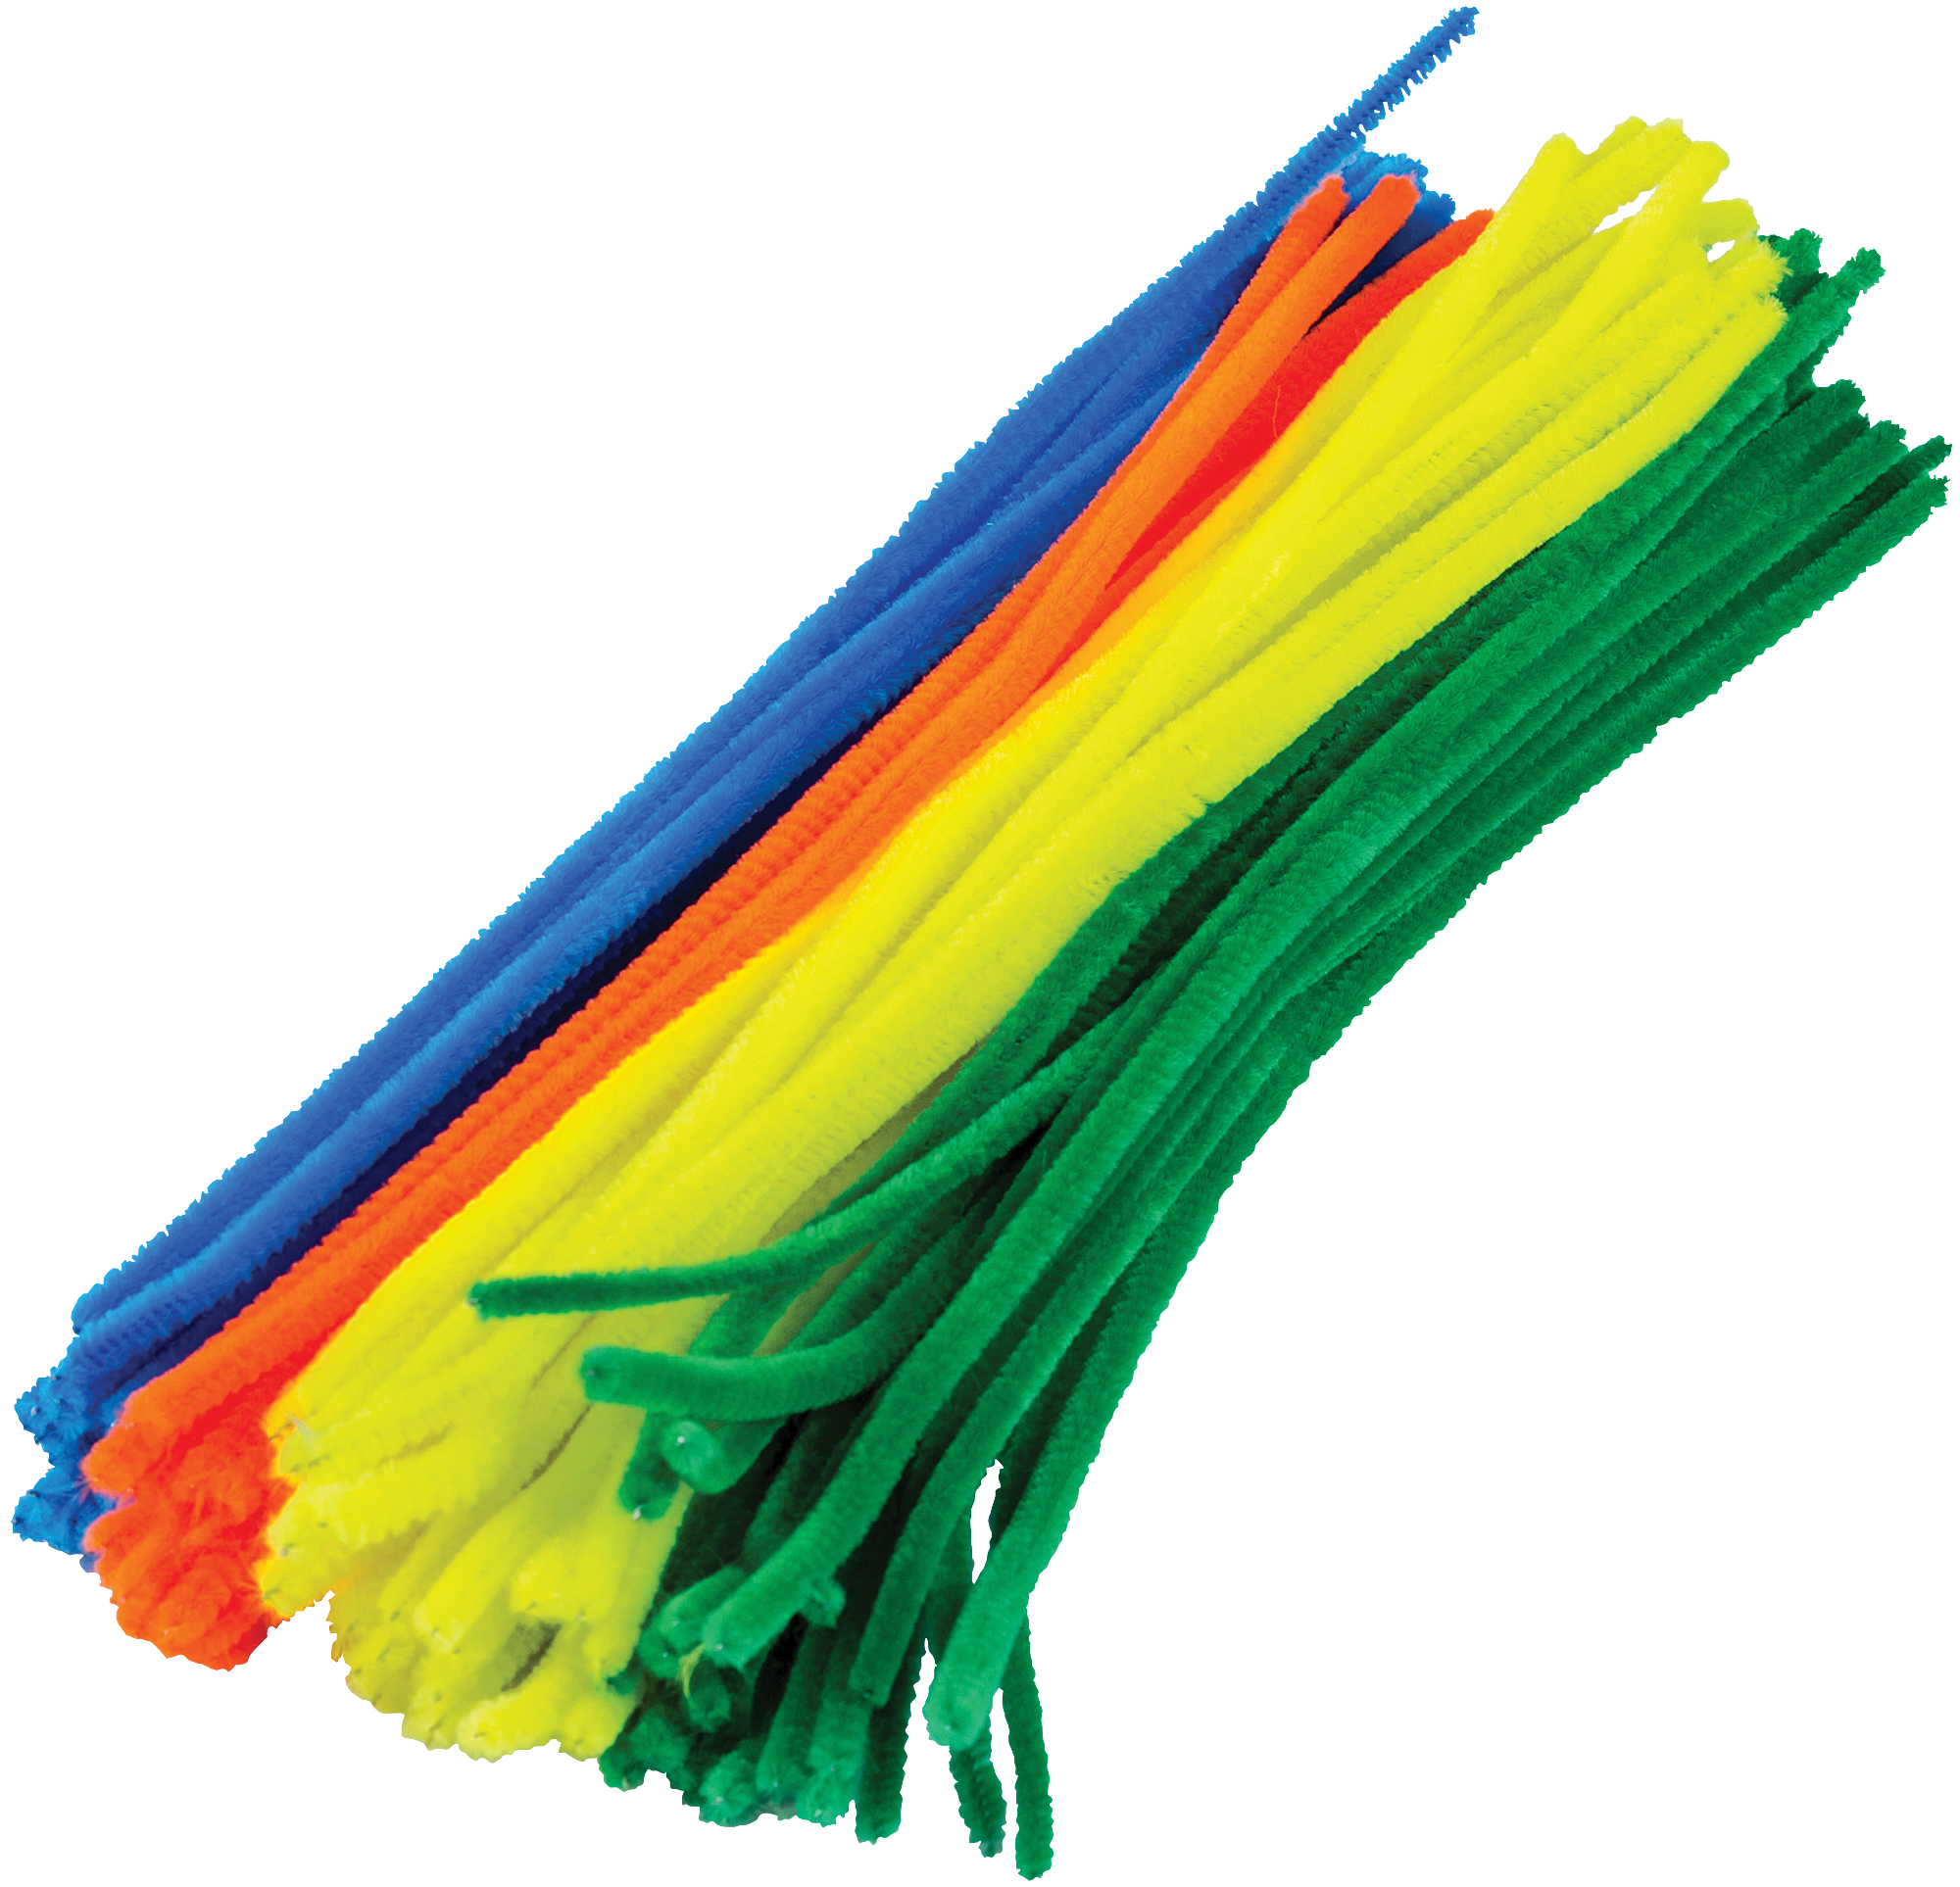 STEM Basics: Pipe Cleaners - 100 Count - TCR20929, Teacher Created  Resources